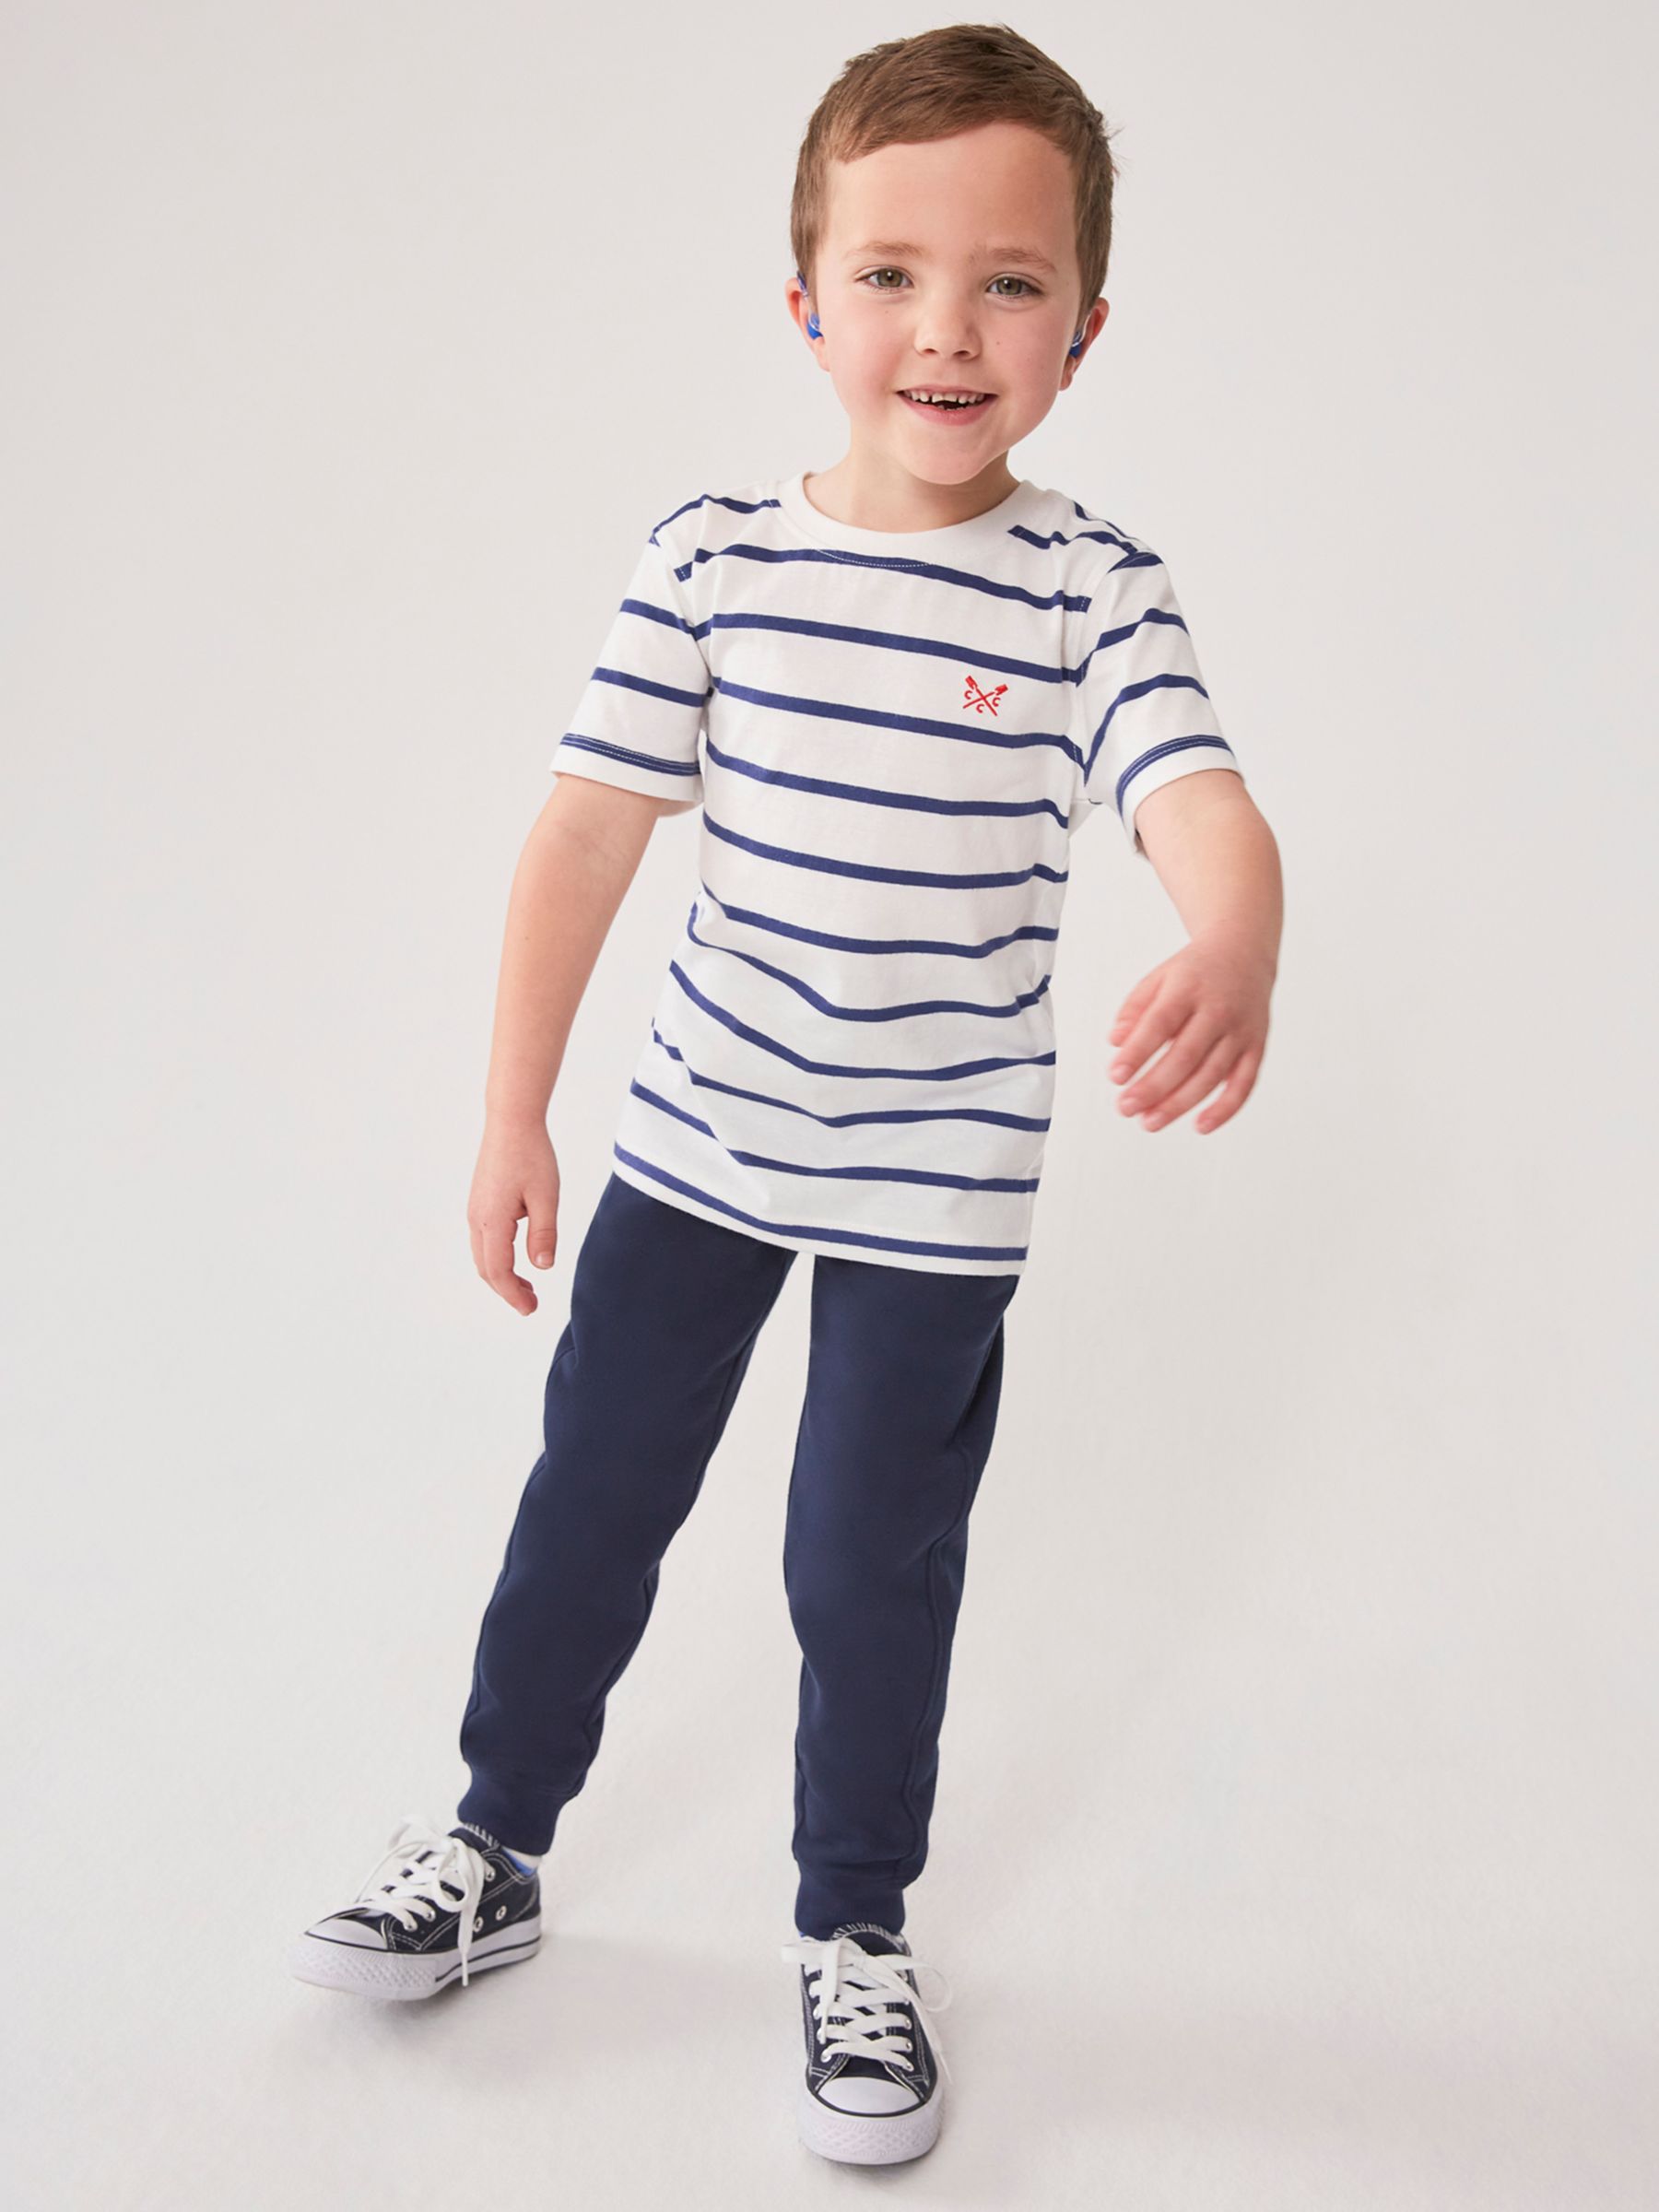 Buy Crew Clothing Kids' Cotton T-Shirt, Pack of 2, Blue/Multi Online at johnlewis.com